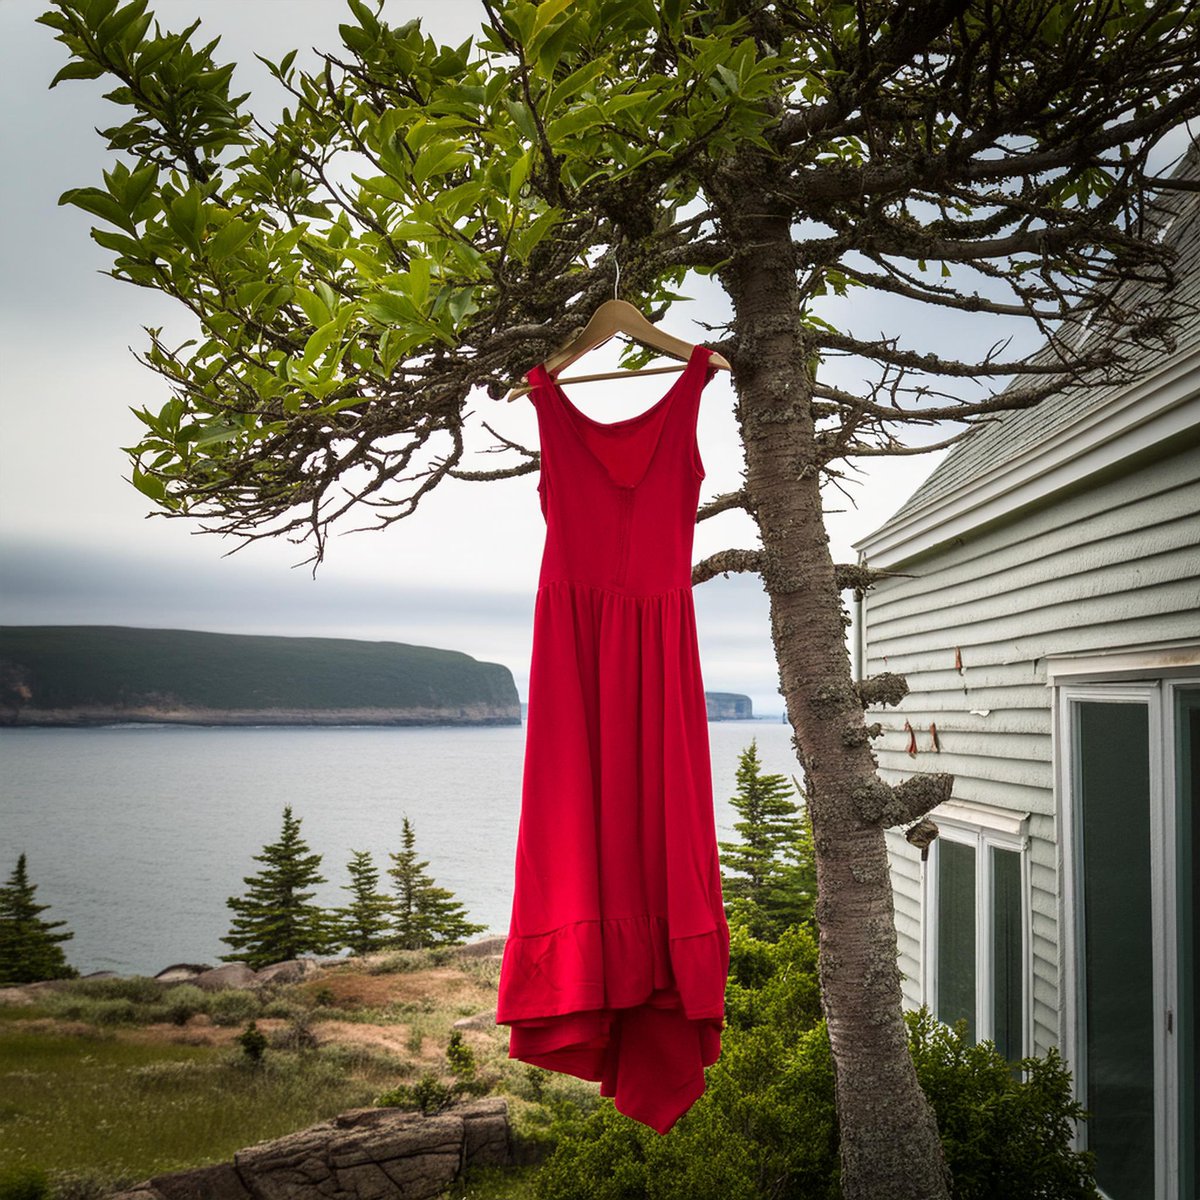 We stand in solidarity on Red Dress Day to honour the Missing and Murdered Indigenous Women & Girls in Newfoundland & Labrador and across Canada. Together, let's work towards ending violence and ensuring the safety and well-being of Indigenous communities. #RedDressDay #MMIWG